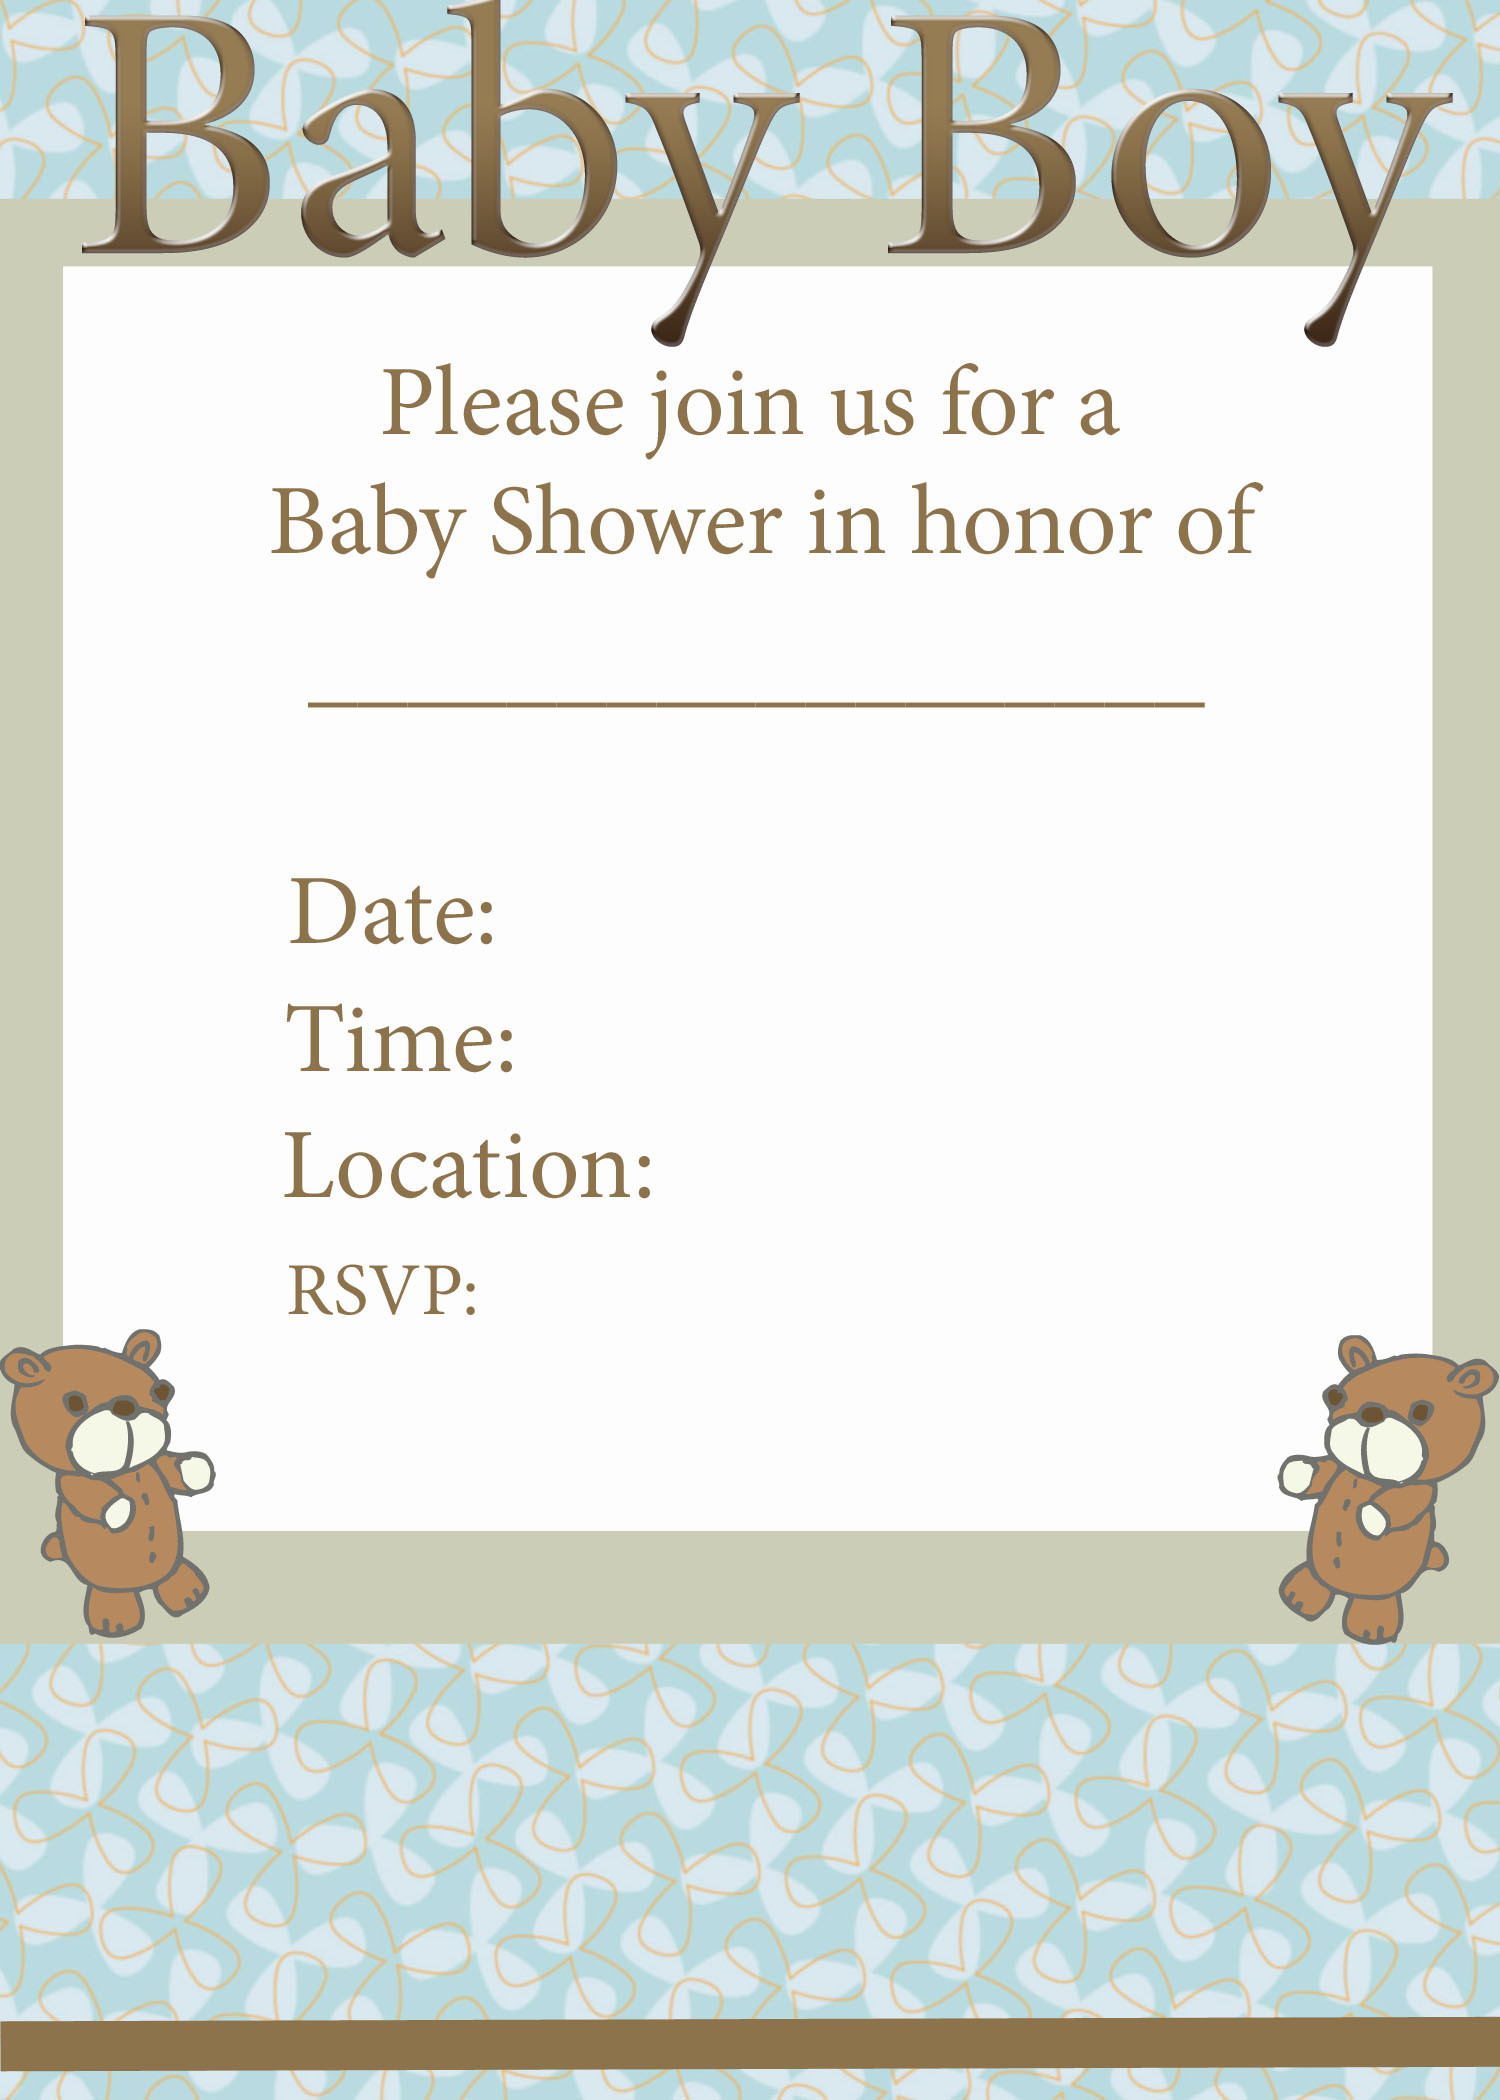 Baby Boy Quotes For Baby Shower
 Invitations For Baby Boy Quotes QuotesGram